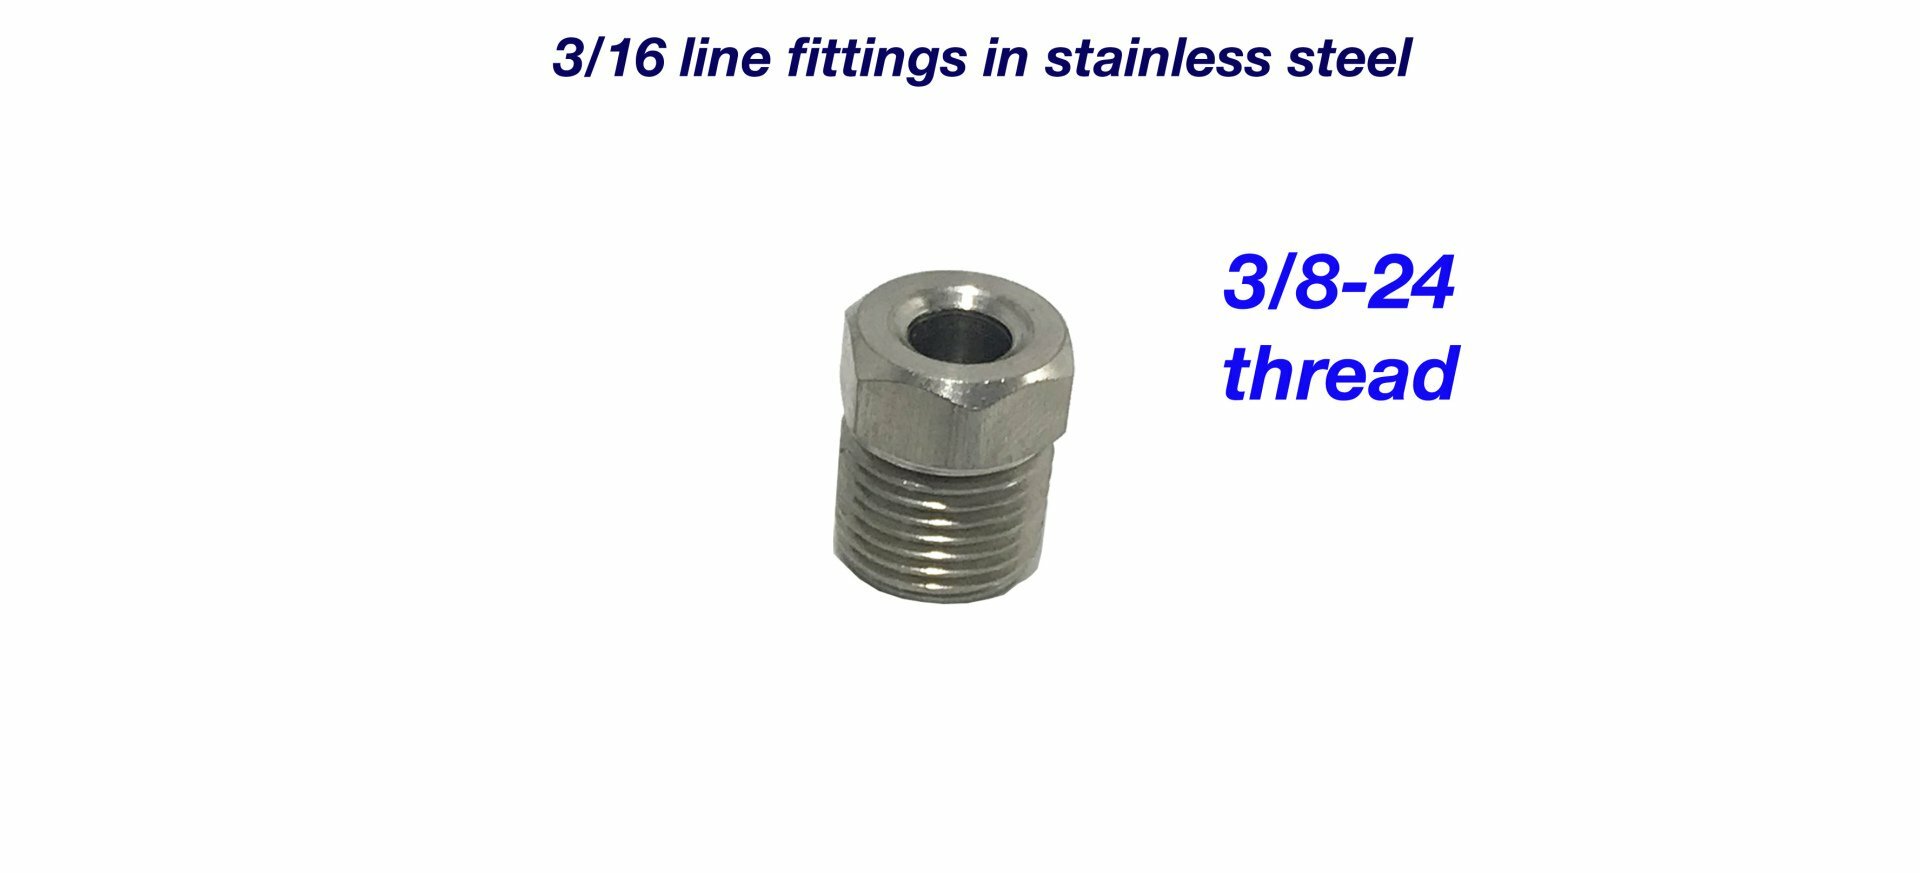 2 pack 9/16-18 Inverted Flare STAINLESS Steel Tube Nut for 3/16" line